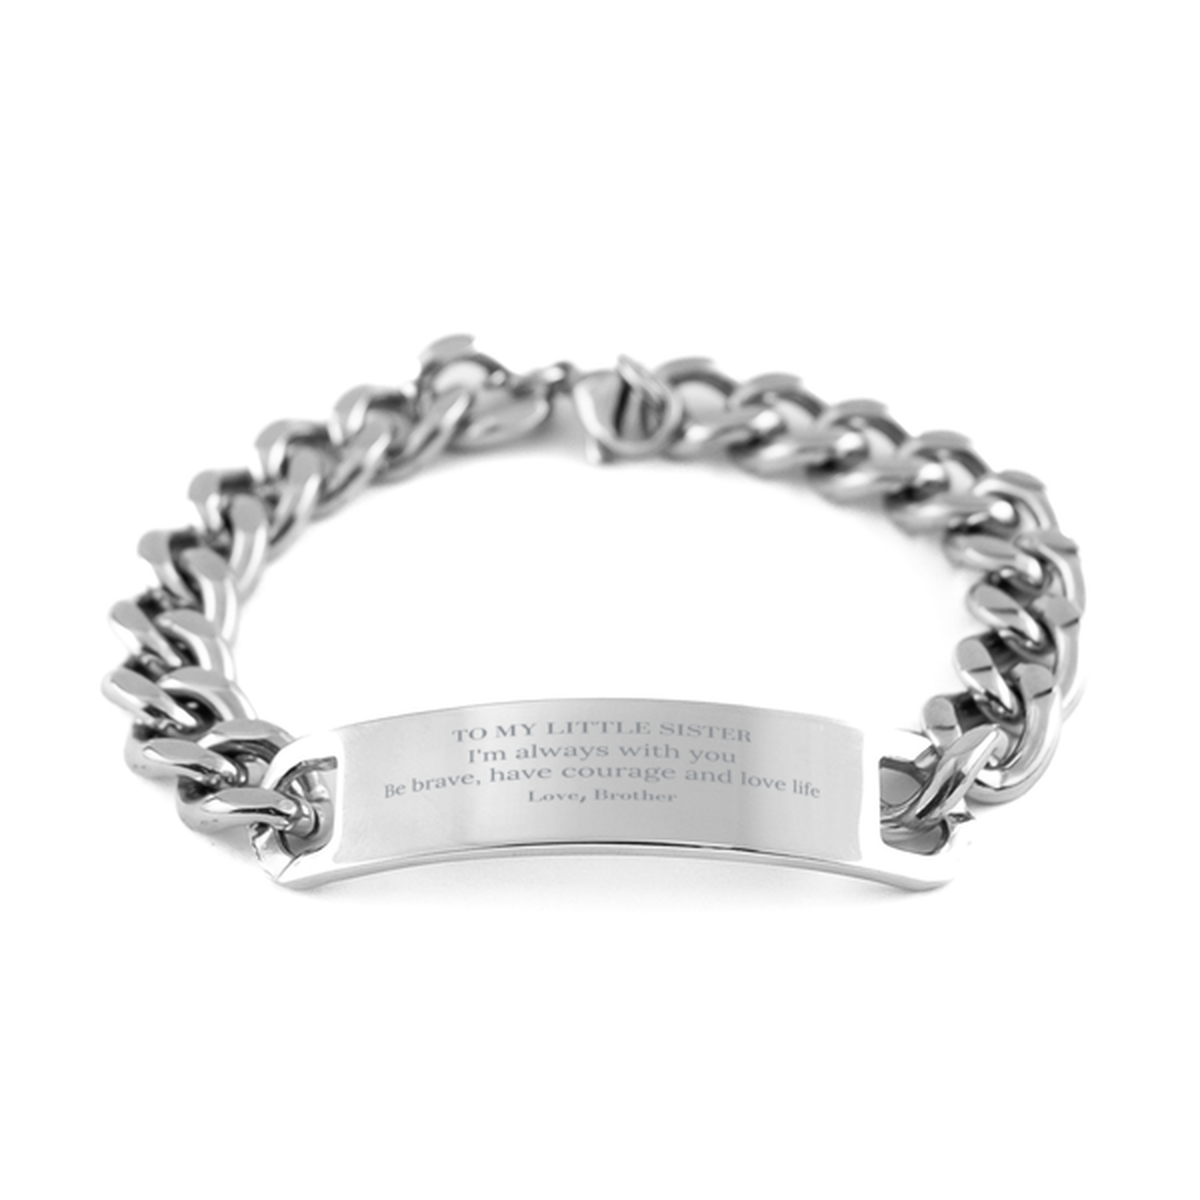 To My Little Sister Gifts from Brother, Unique Cuban Chain Stainless Steel Bracelet Inspirational Christmas Birthday Graduation Gifts for Little Sister I'm always with you. Be brave, have courage and love life. Love, Brother